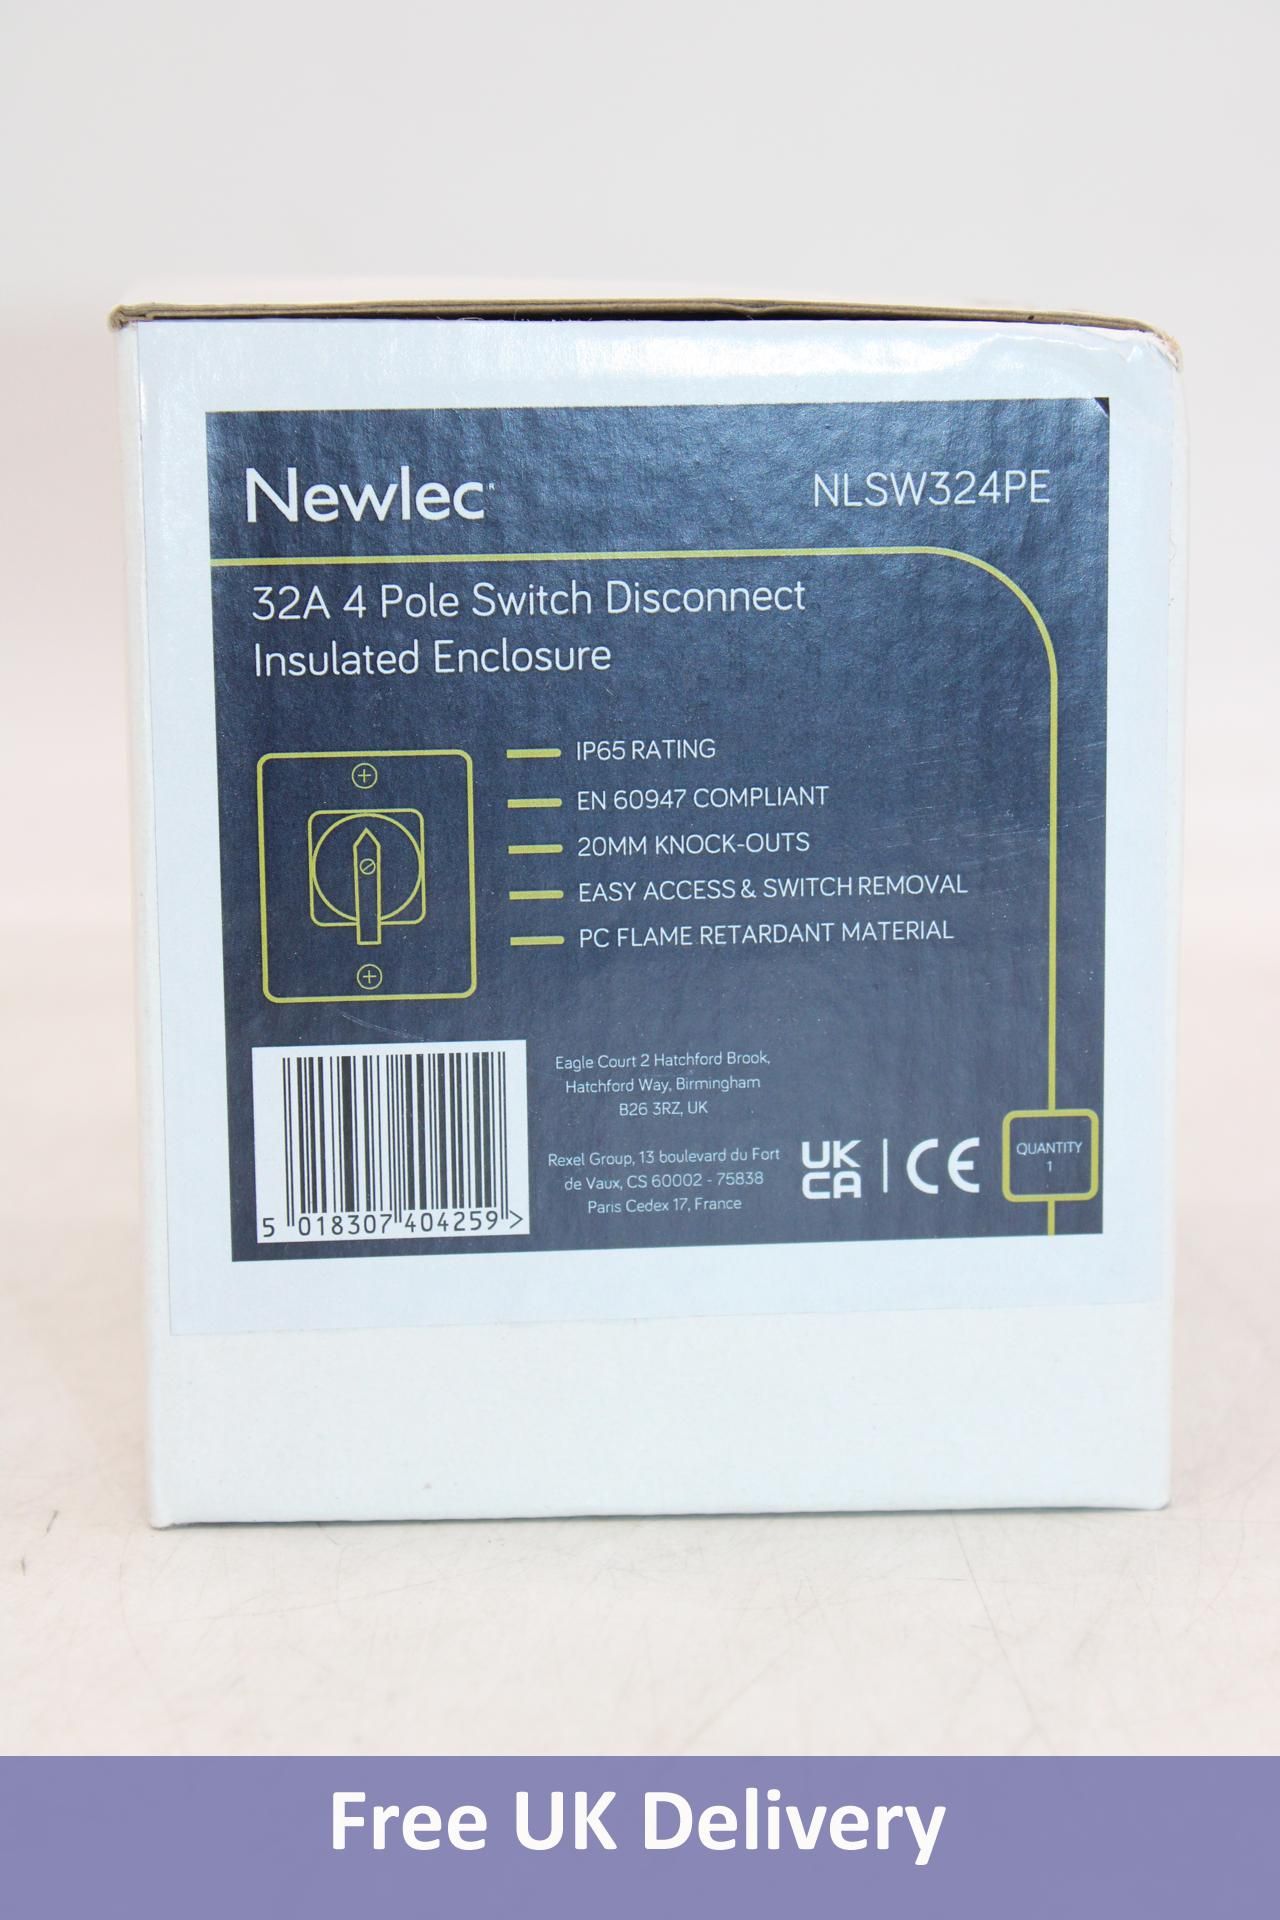 Thirty Newlec NLSW324PE 32A 4 Pole Switch Disconnect Insulated Enclosures